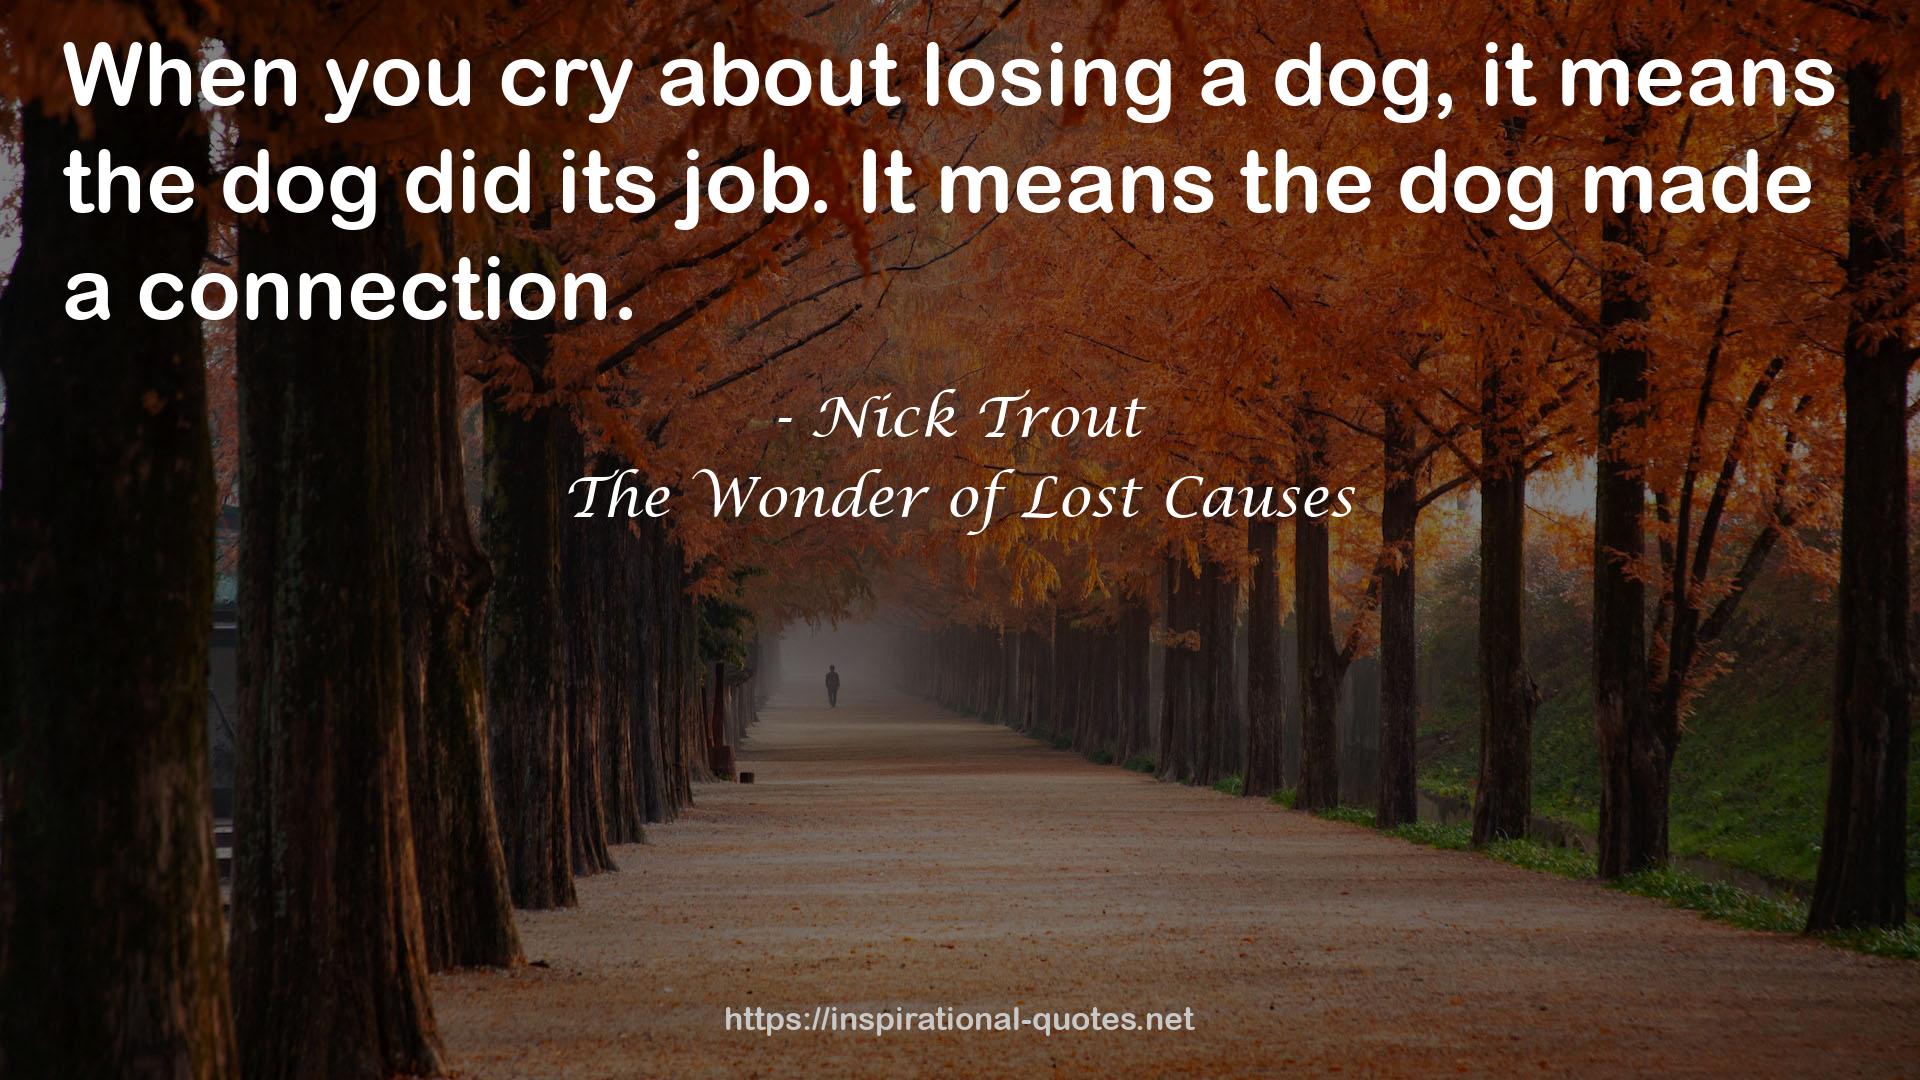 The Wonder of Lost Causes QUOTES